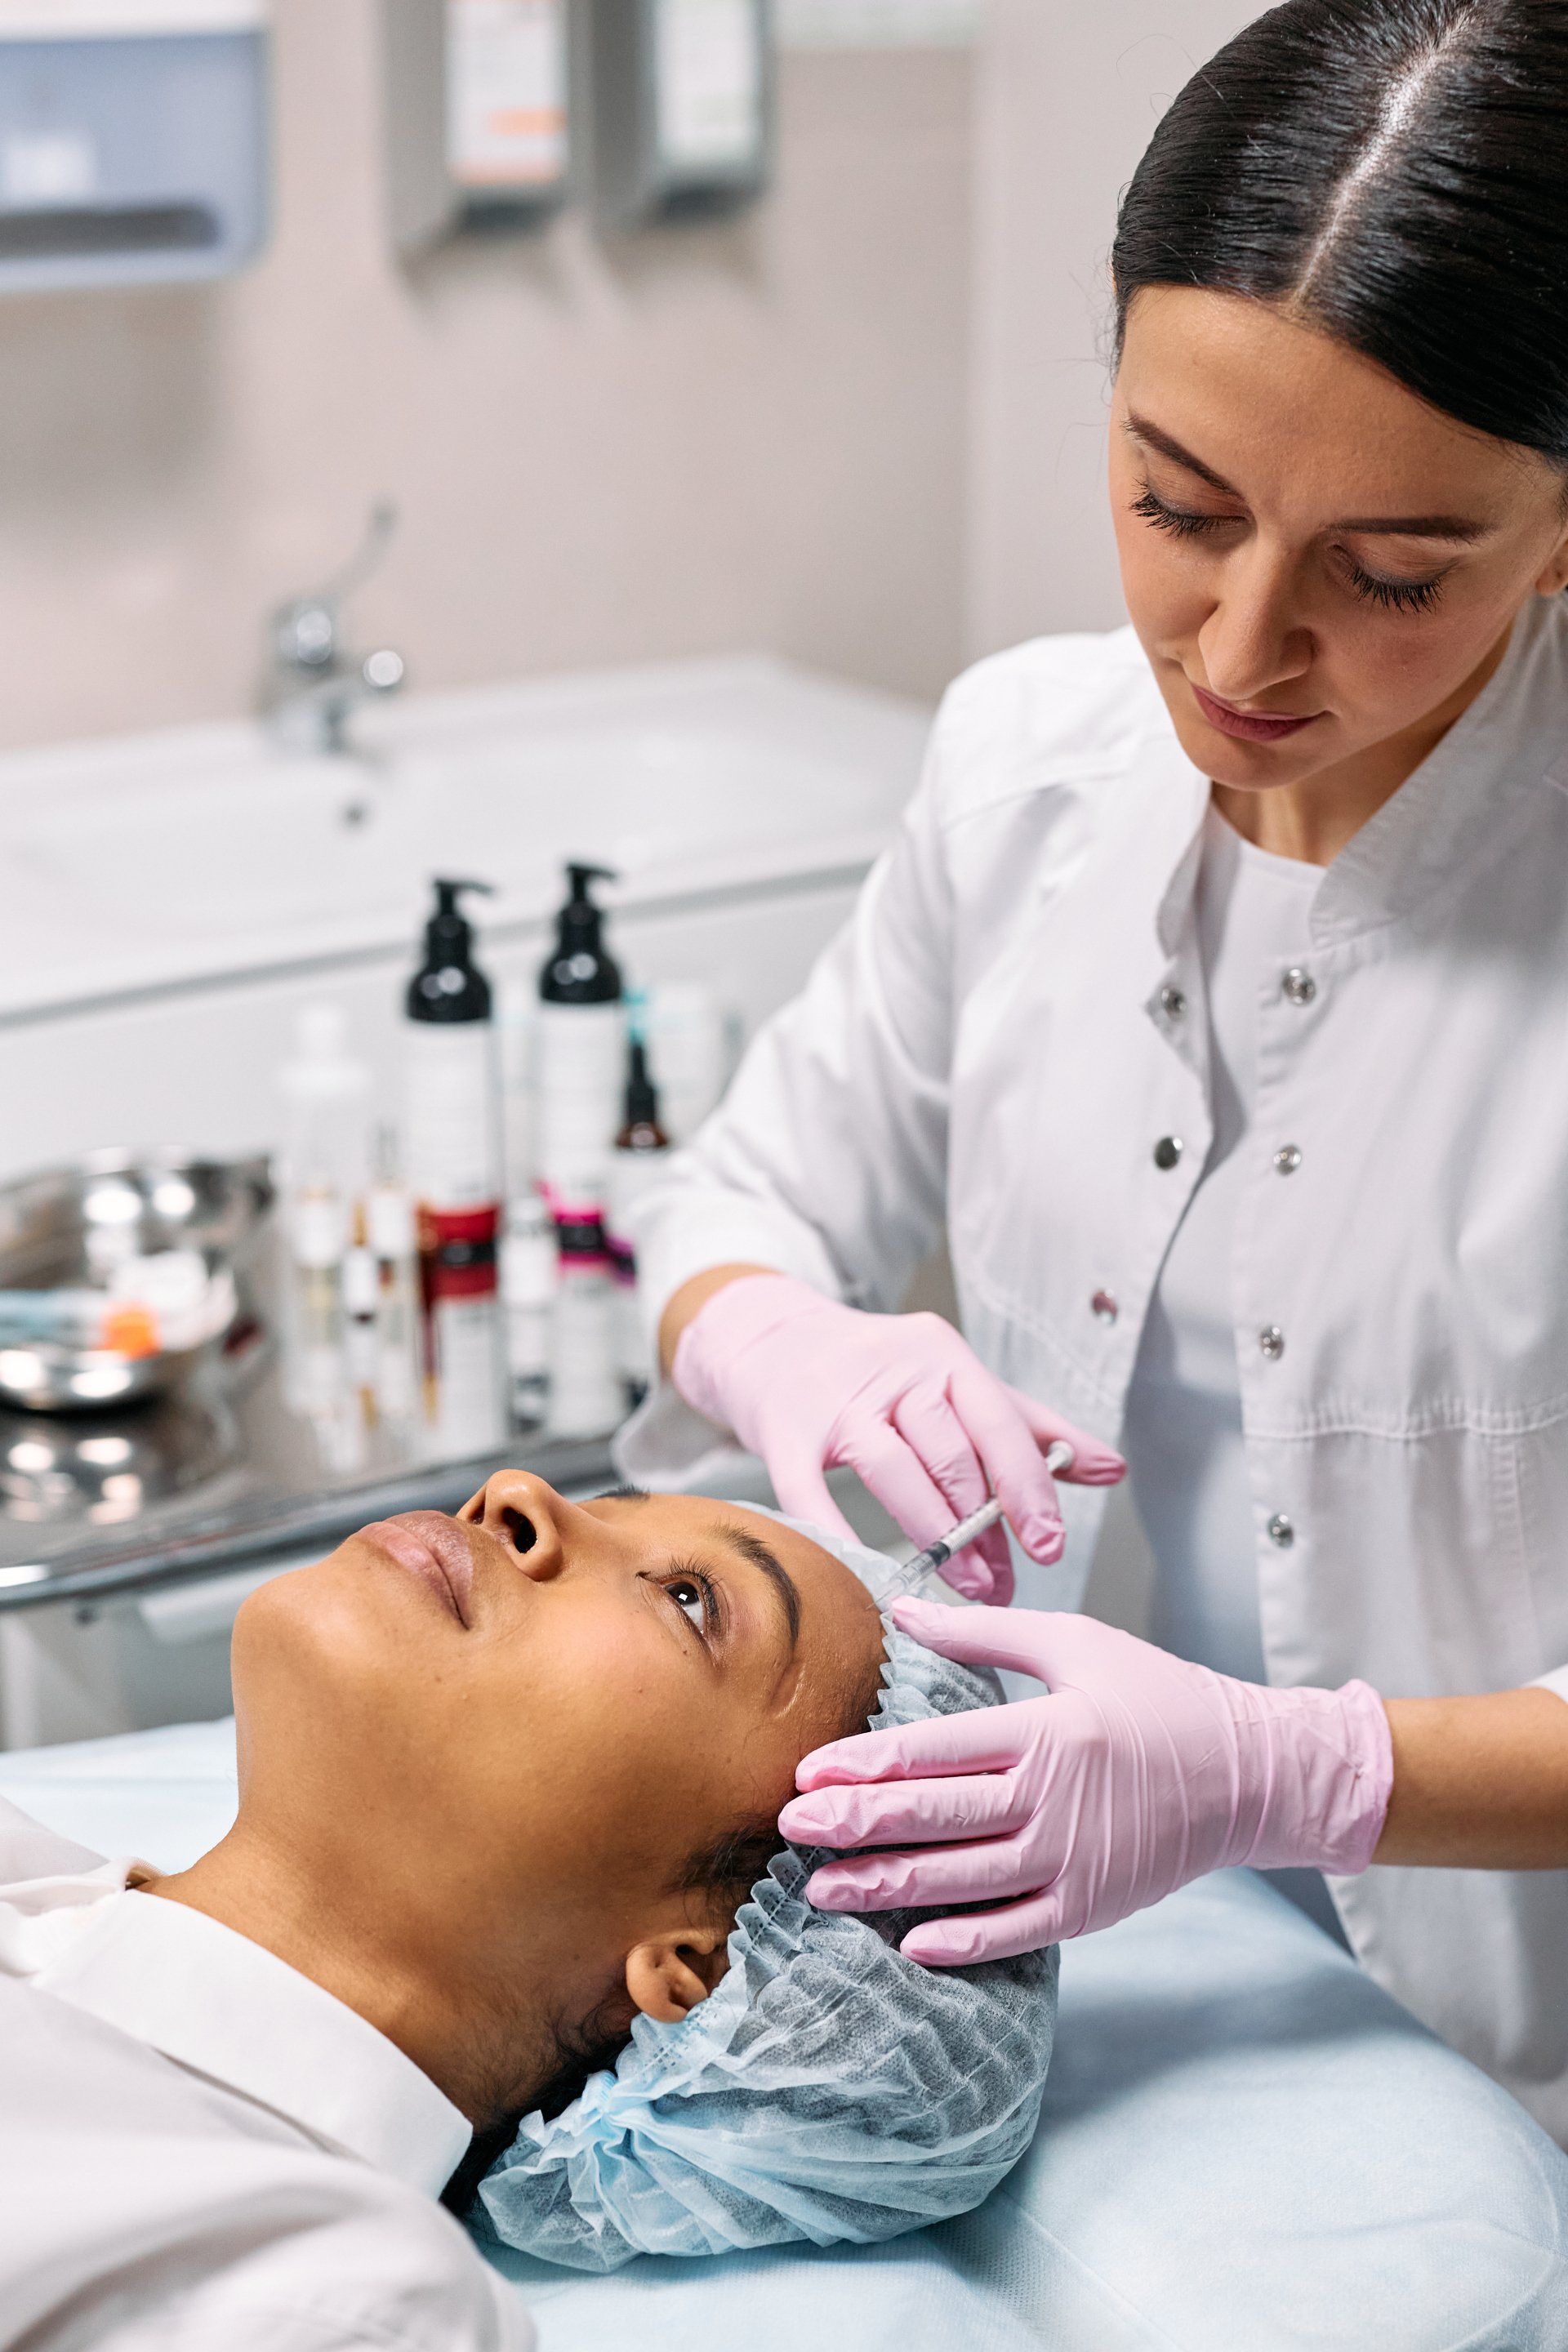 A Guide to Injectable Treatments: BOTOX®, Fillers, and More